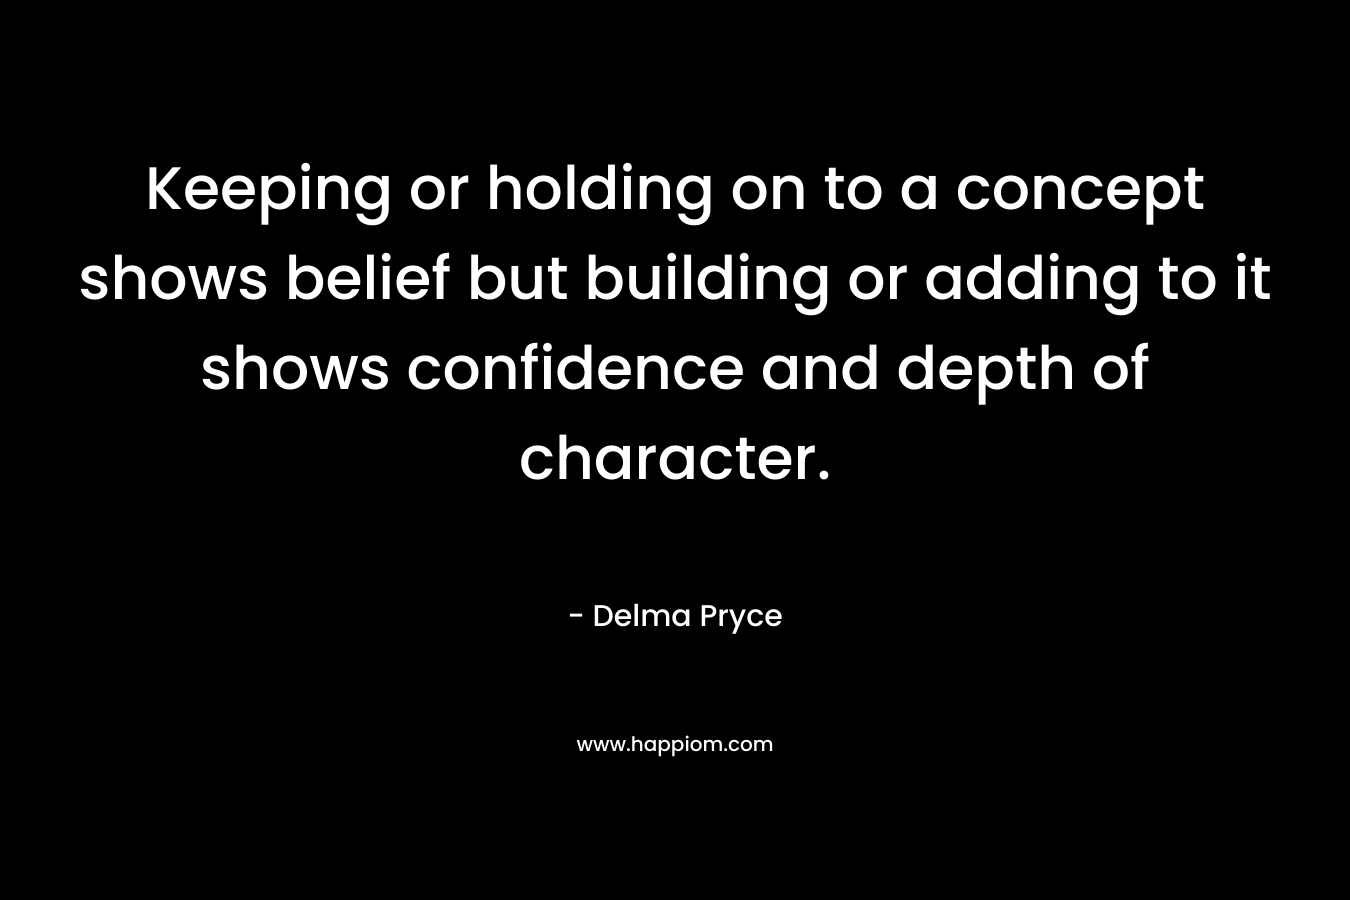 Keeping or holding on to a concept shows belief but building or adding to it shows confidence and depth of character.